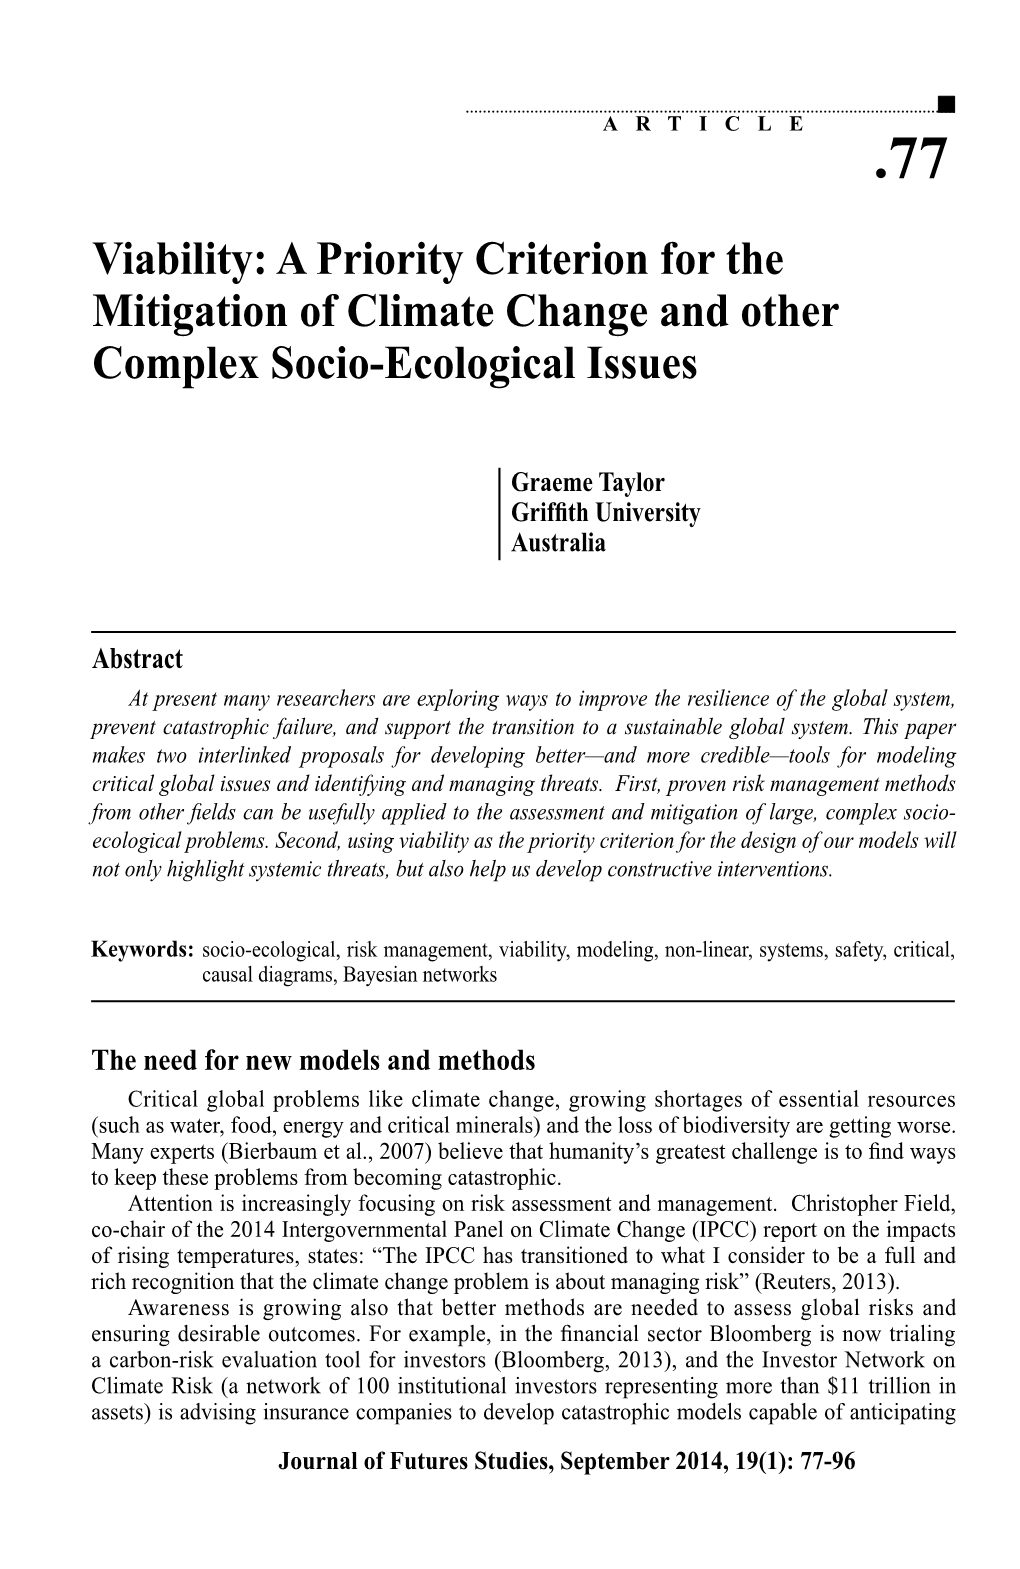 Viability: a Priority Criterion for the Mitigation of Climate Change and Other Complex Socio-Ecological Issues